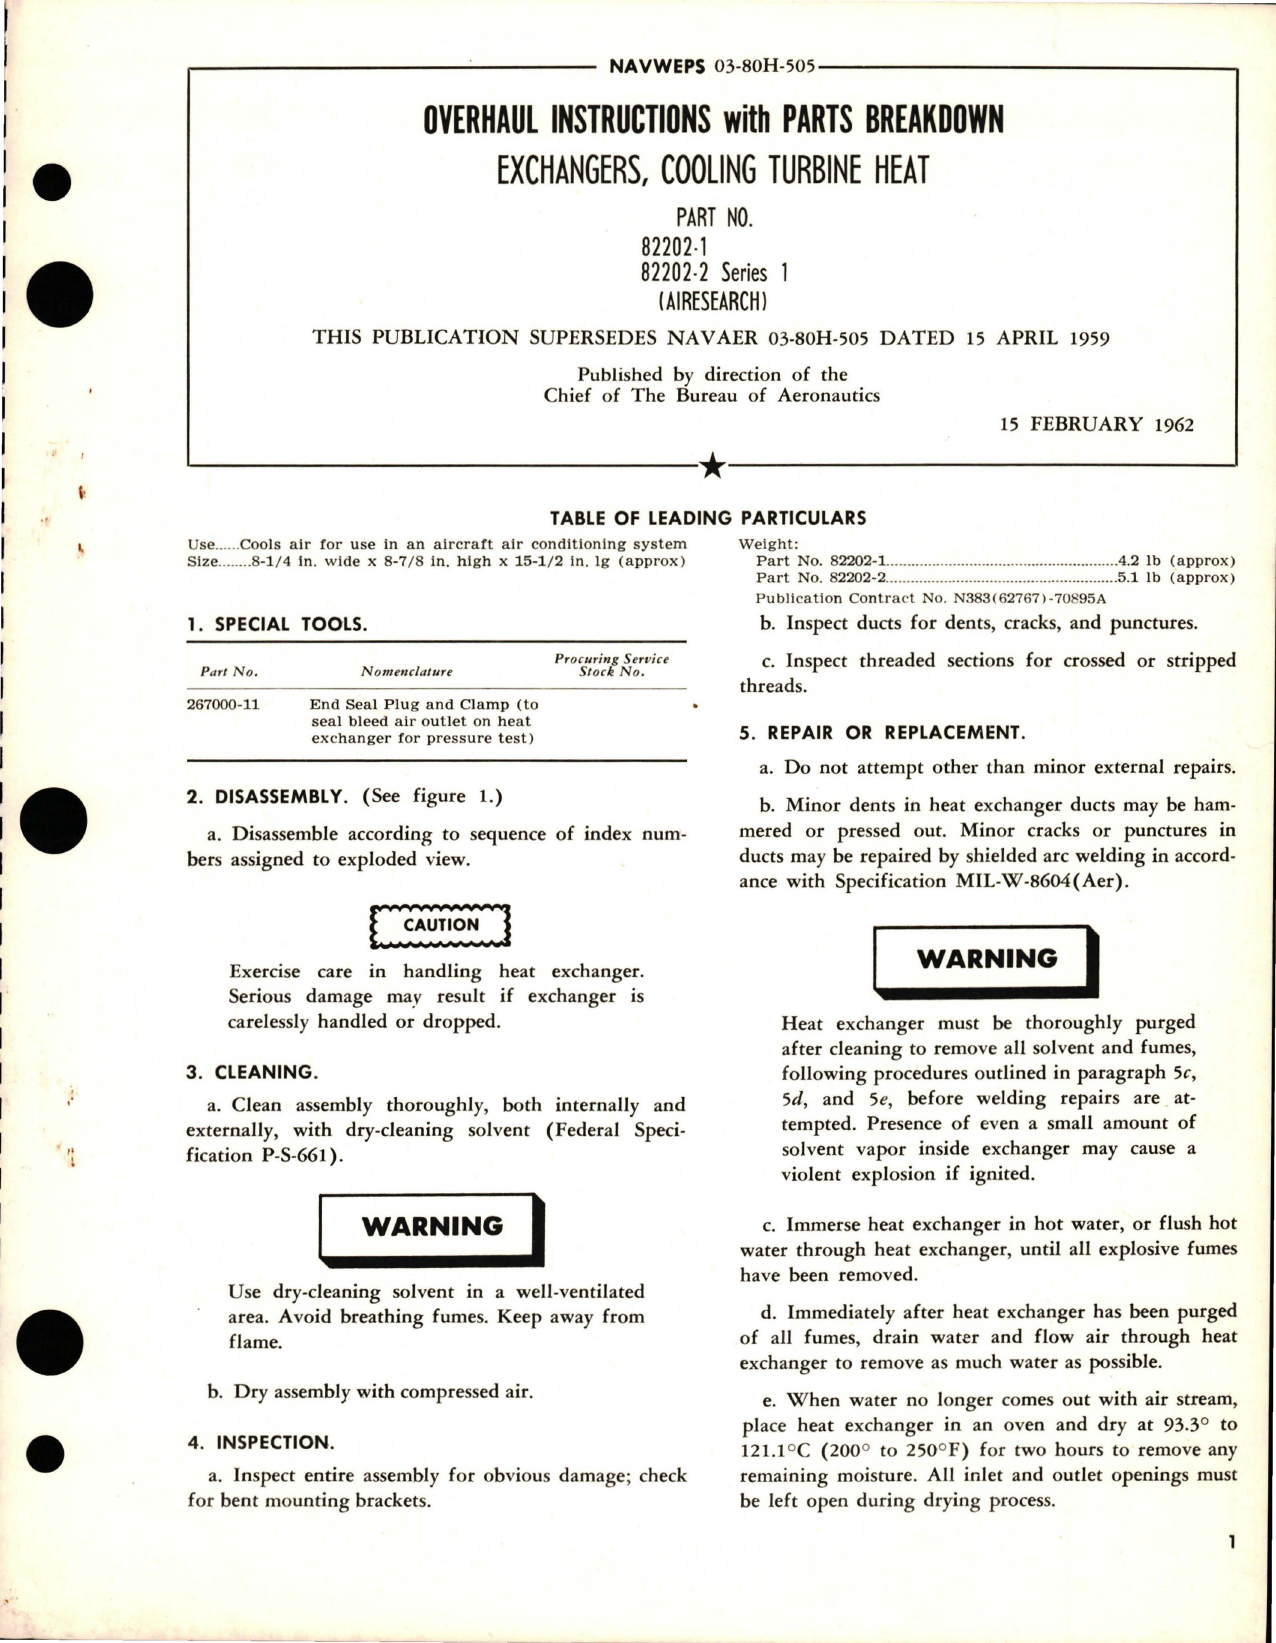 Sample page 1 from AirCorps Library document: Overhaul Instructions with Parts Breakdown for Cooling Turbine Heat Exchangers - Parts 82202-1 and 82202-2 Series 1